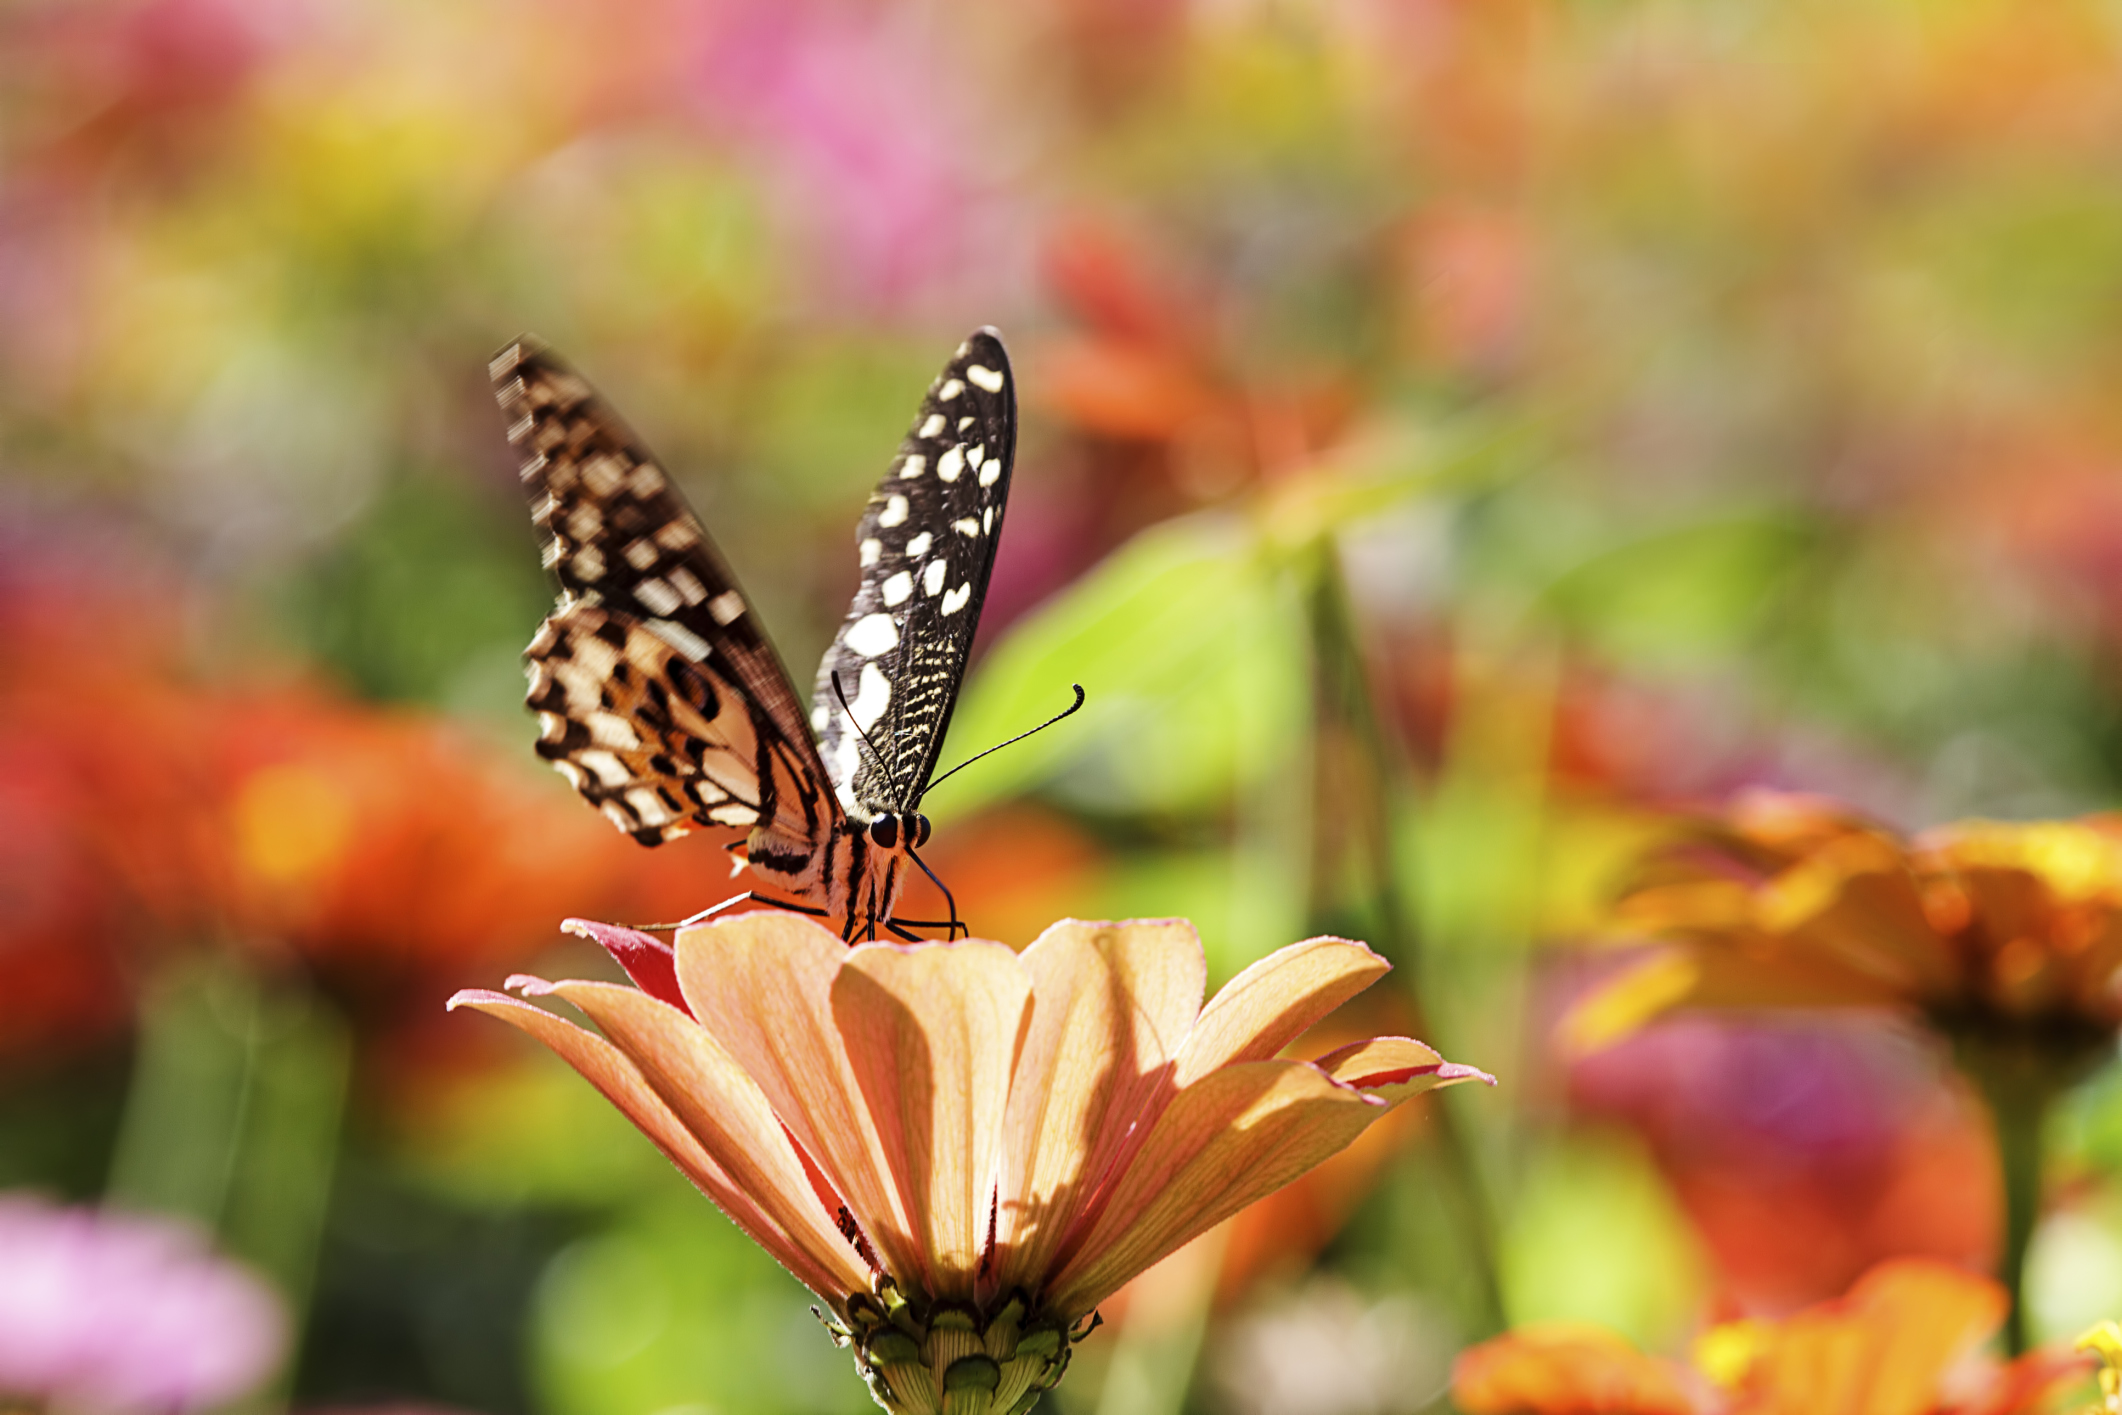 BENEFITS OF BUTTERFLIES TO THE ENVIRONMENT